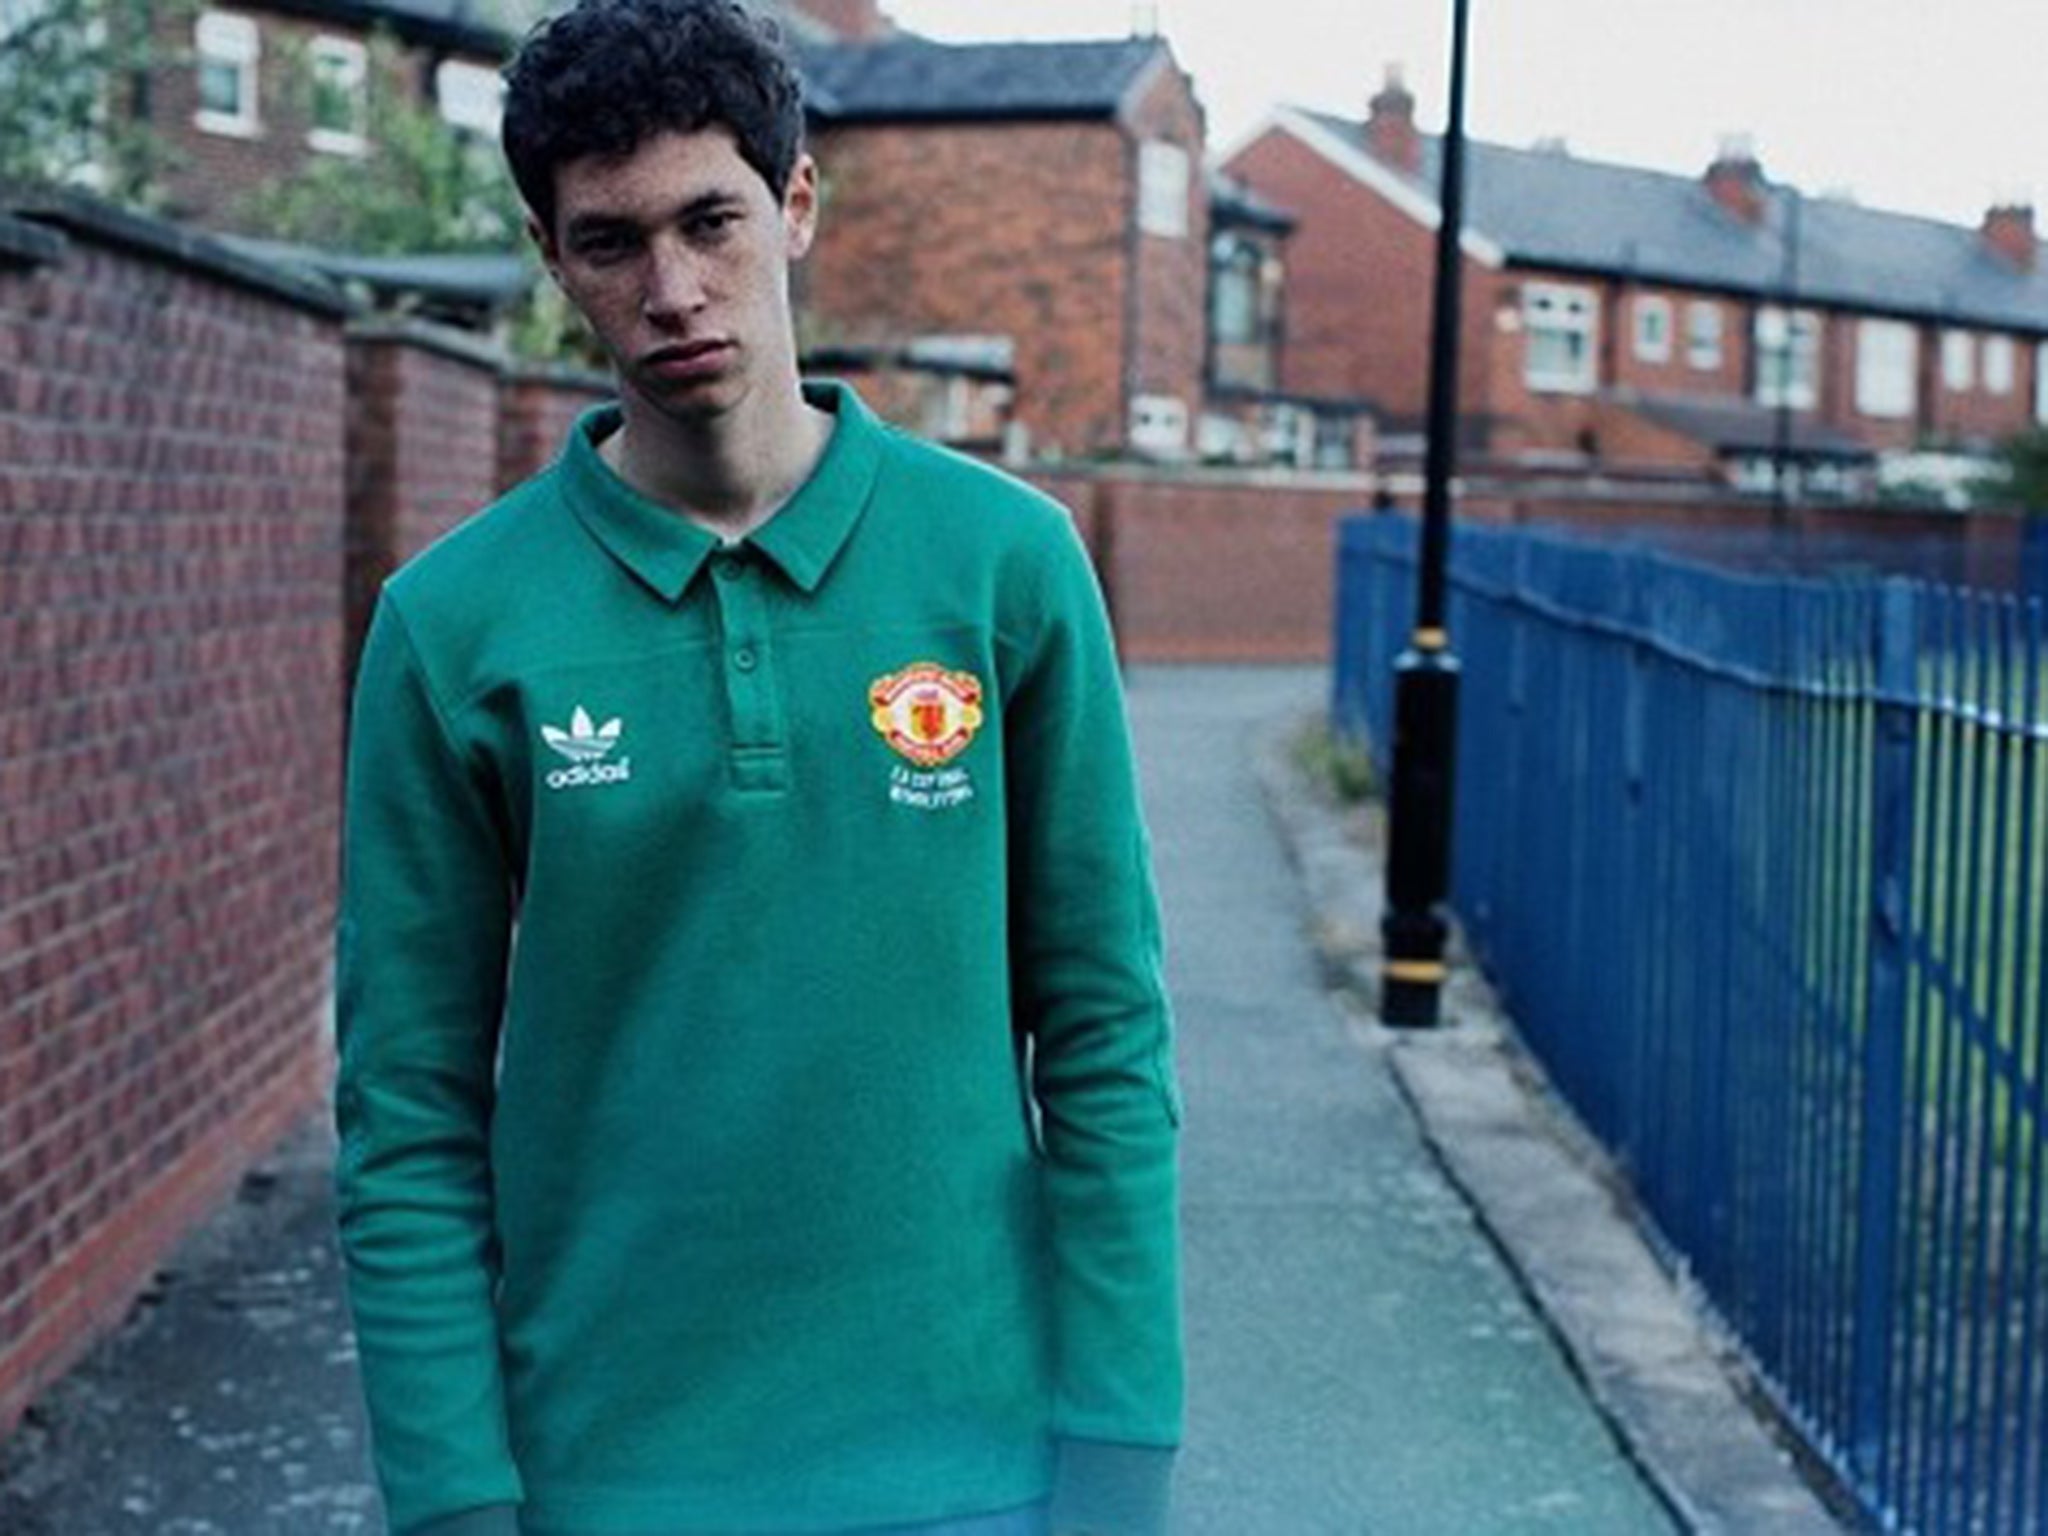 Manchester United kit: Adidas Originals launch retro United shirt inspired  by 1985 FA Cup triumph, The Independent